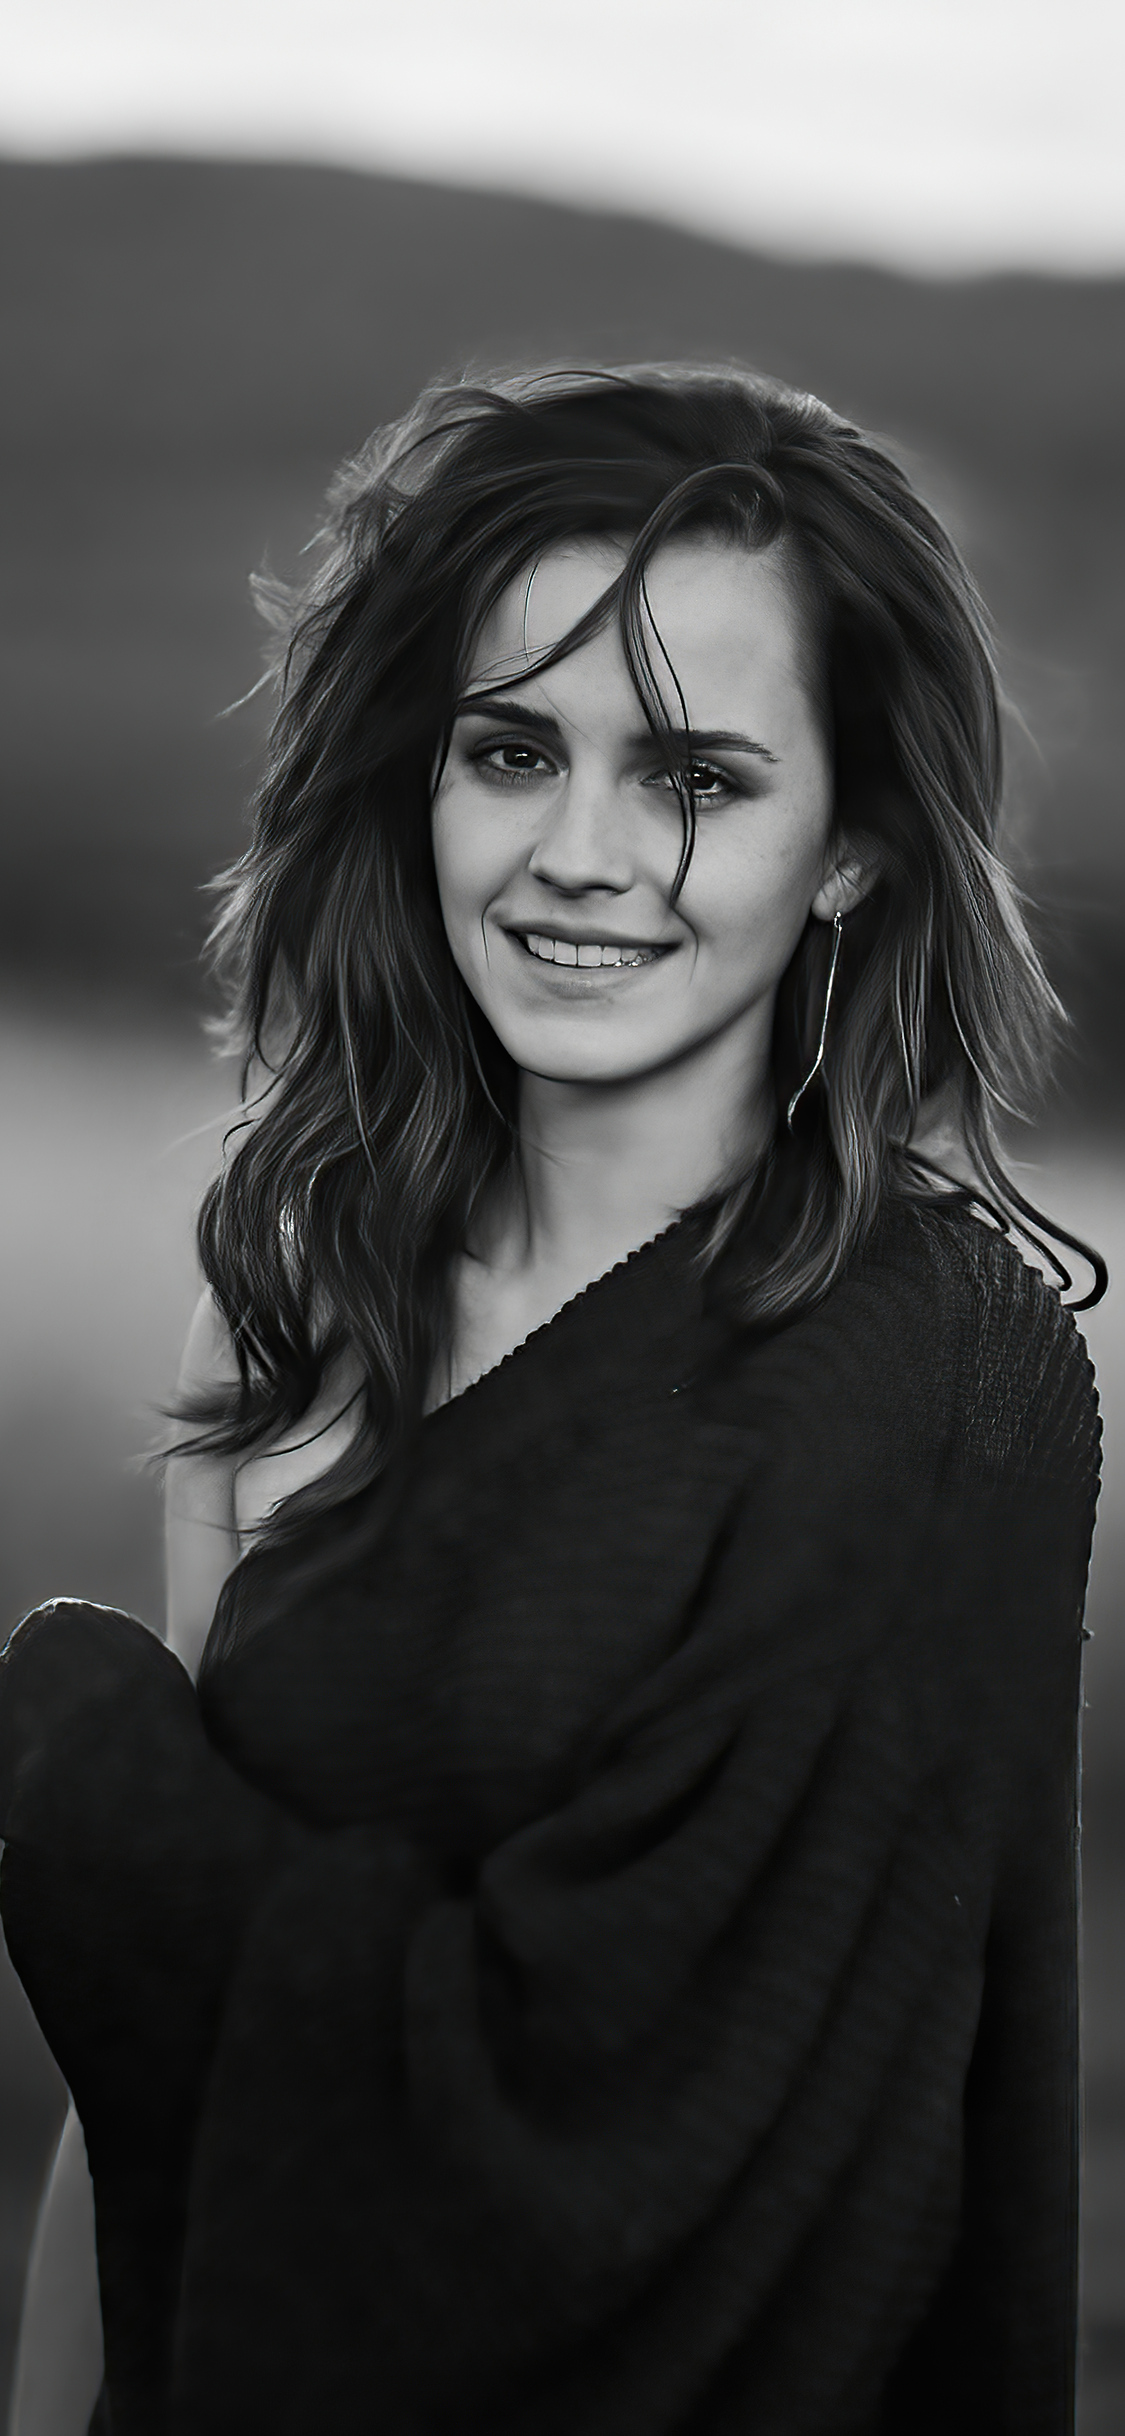 Emma Watson 34 1080x1920 iPhone 8/7/6/6S Plus wallpaper, background,  picture, image